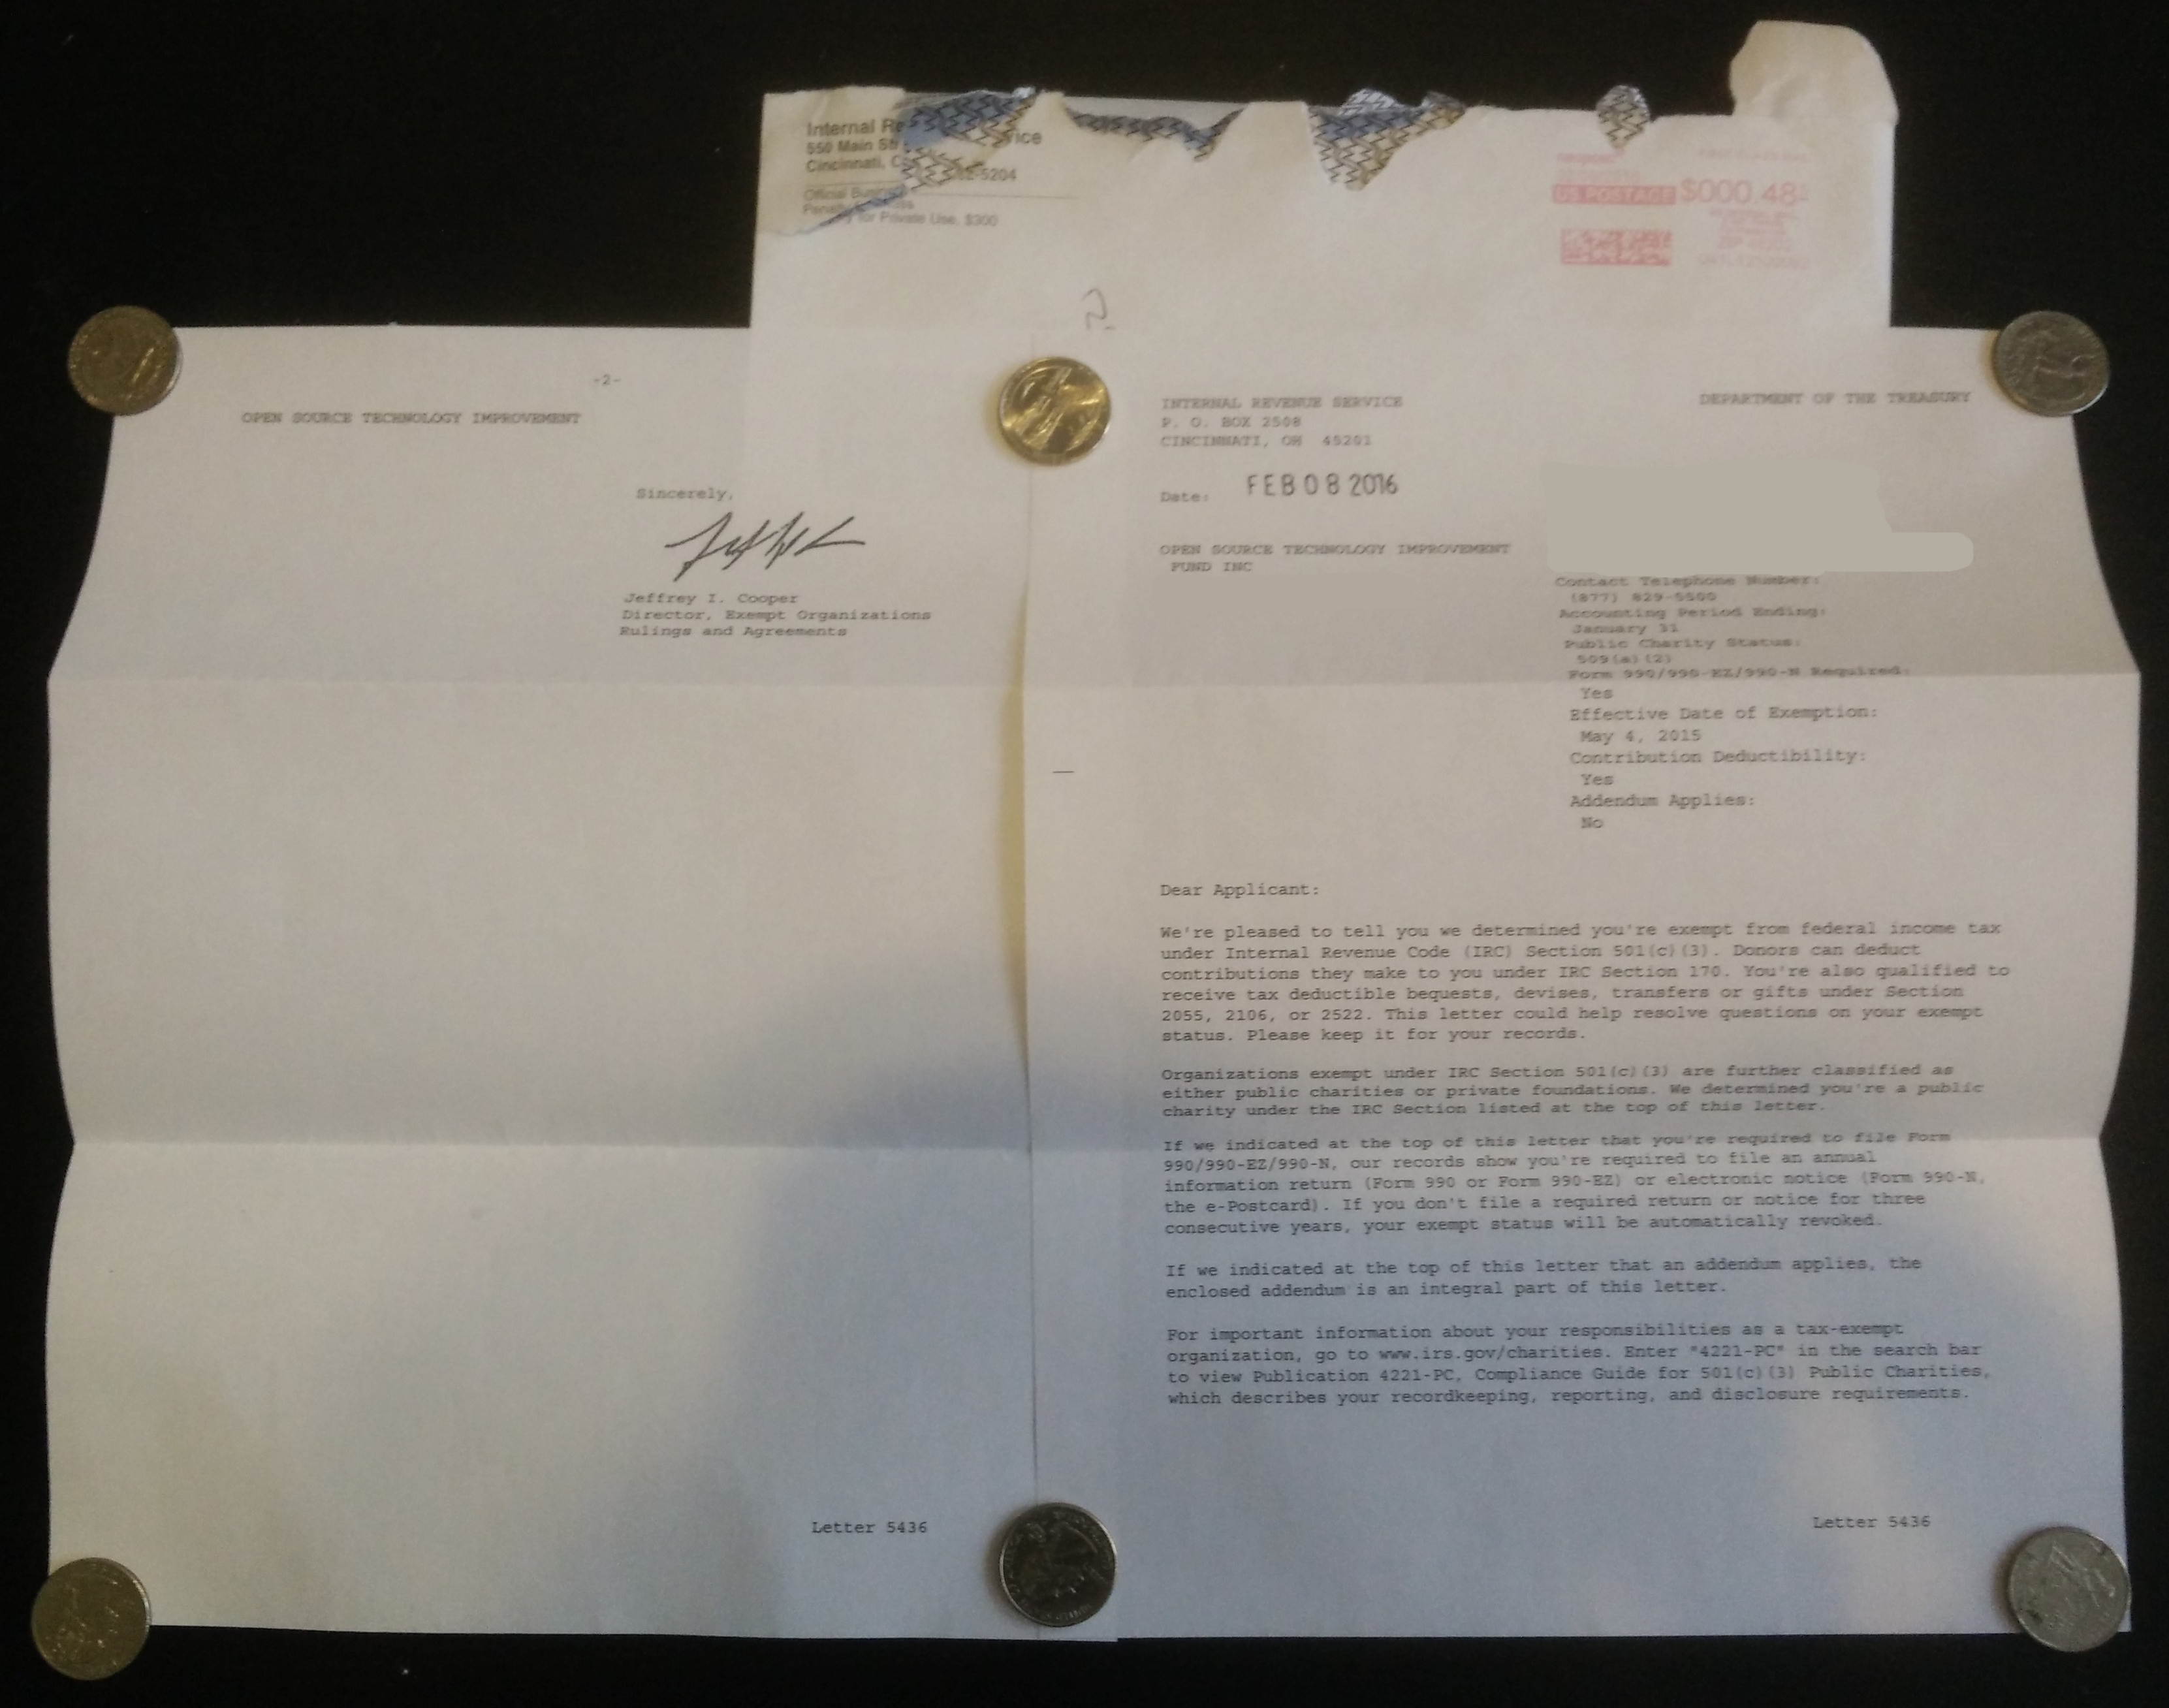 This is the IRS 501c3 certification letter from the US Treasury department. We are now an official charity.